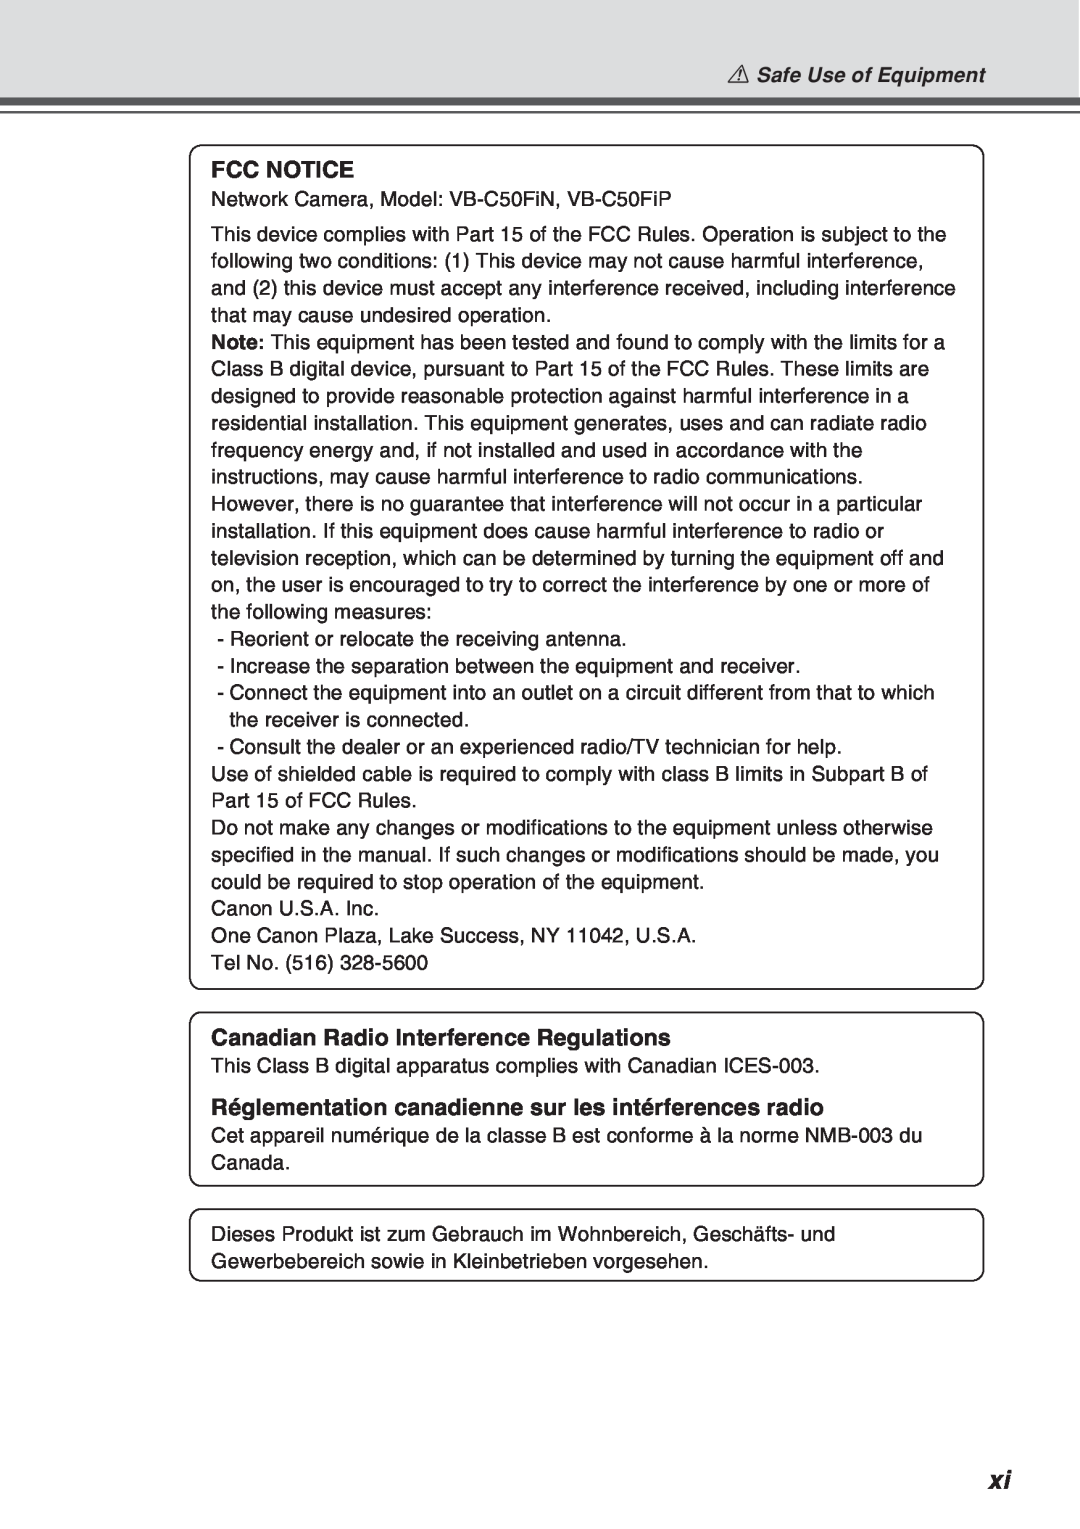 Canon Vb-C50fi user manual Fcc Notice, Canadian Radio Interference Regulations, aSafe Use of Equipment 